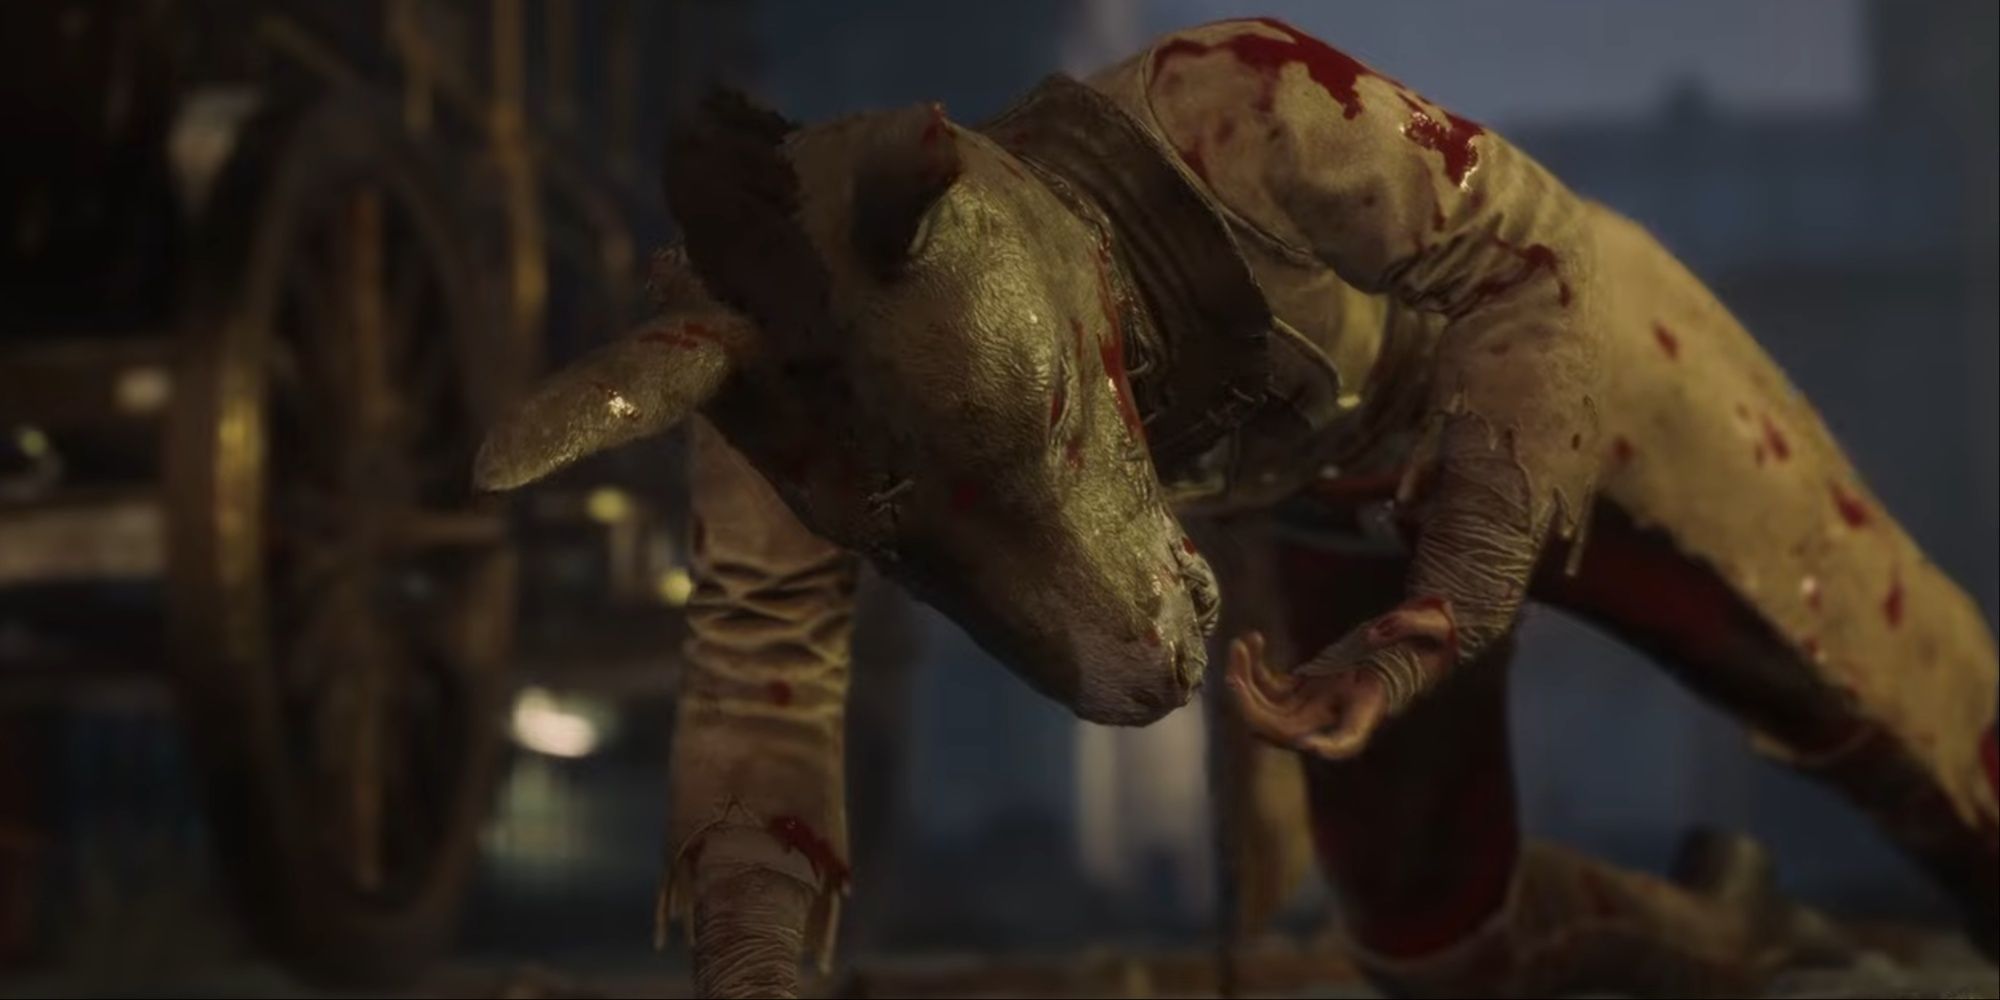 The Stalker known as the Mad donkey bloodied and kneeling in a cutscene after being defeated by Pinocchio.